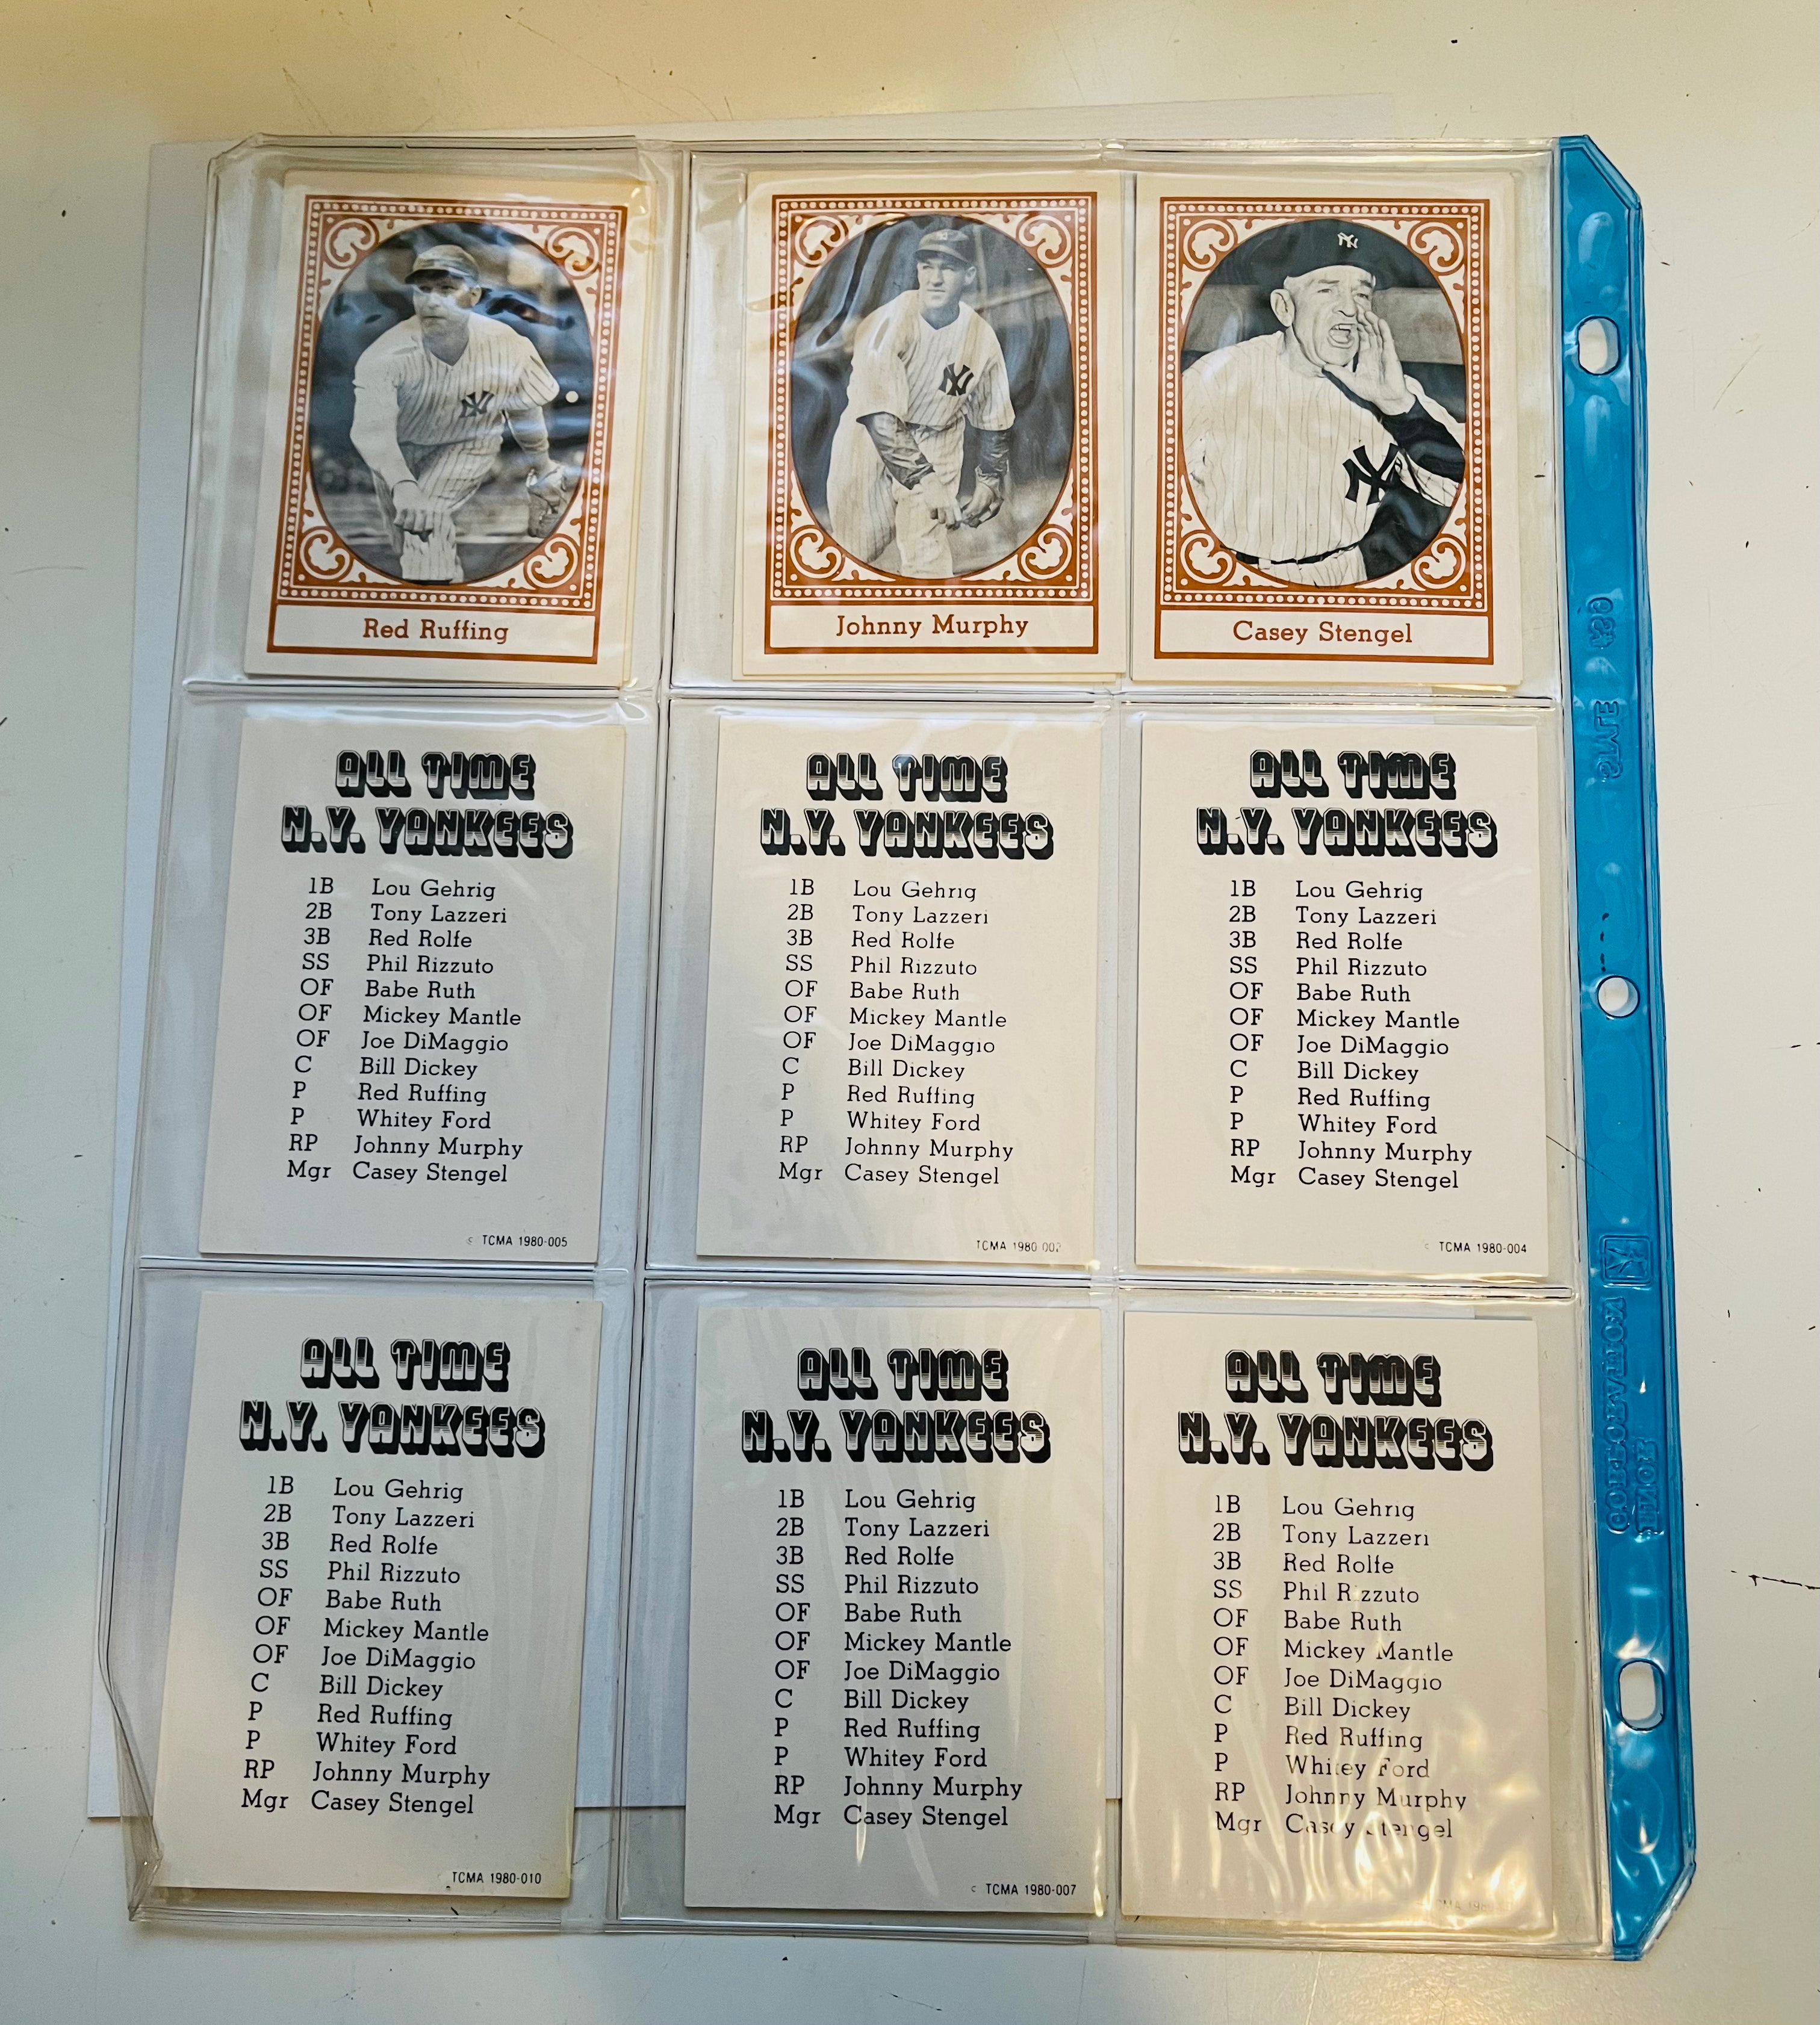 1980 New York Yankees all time greats card set